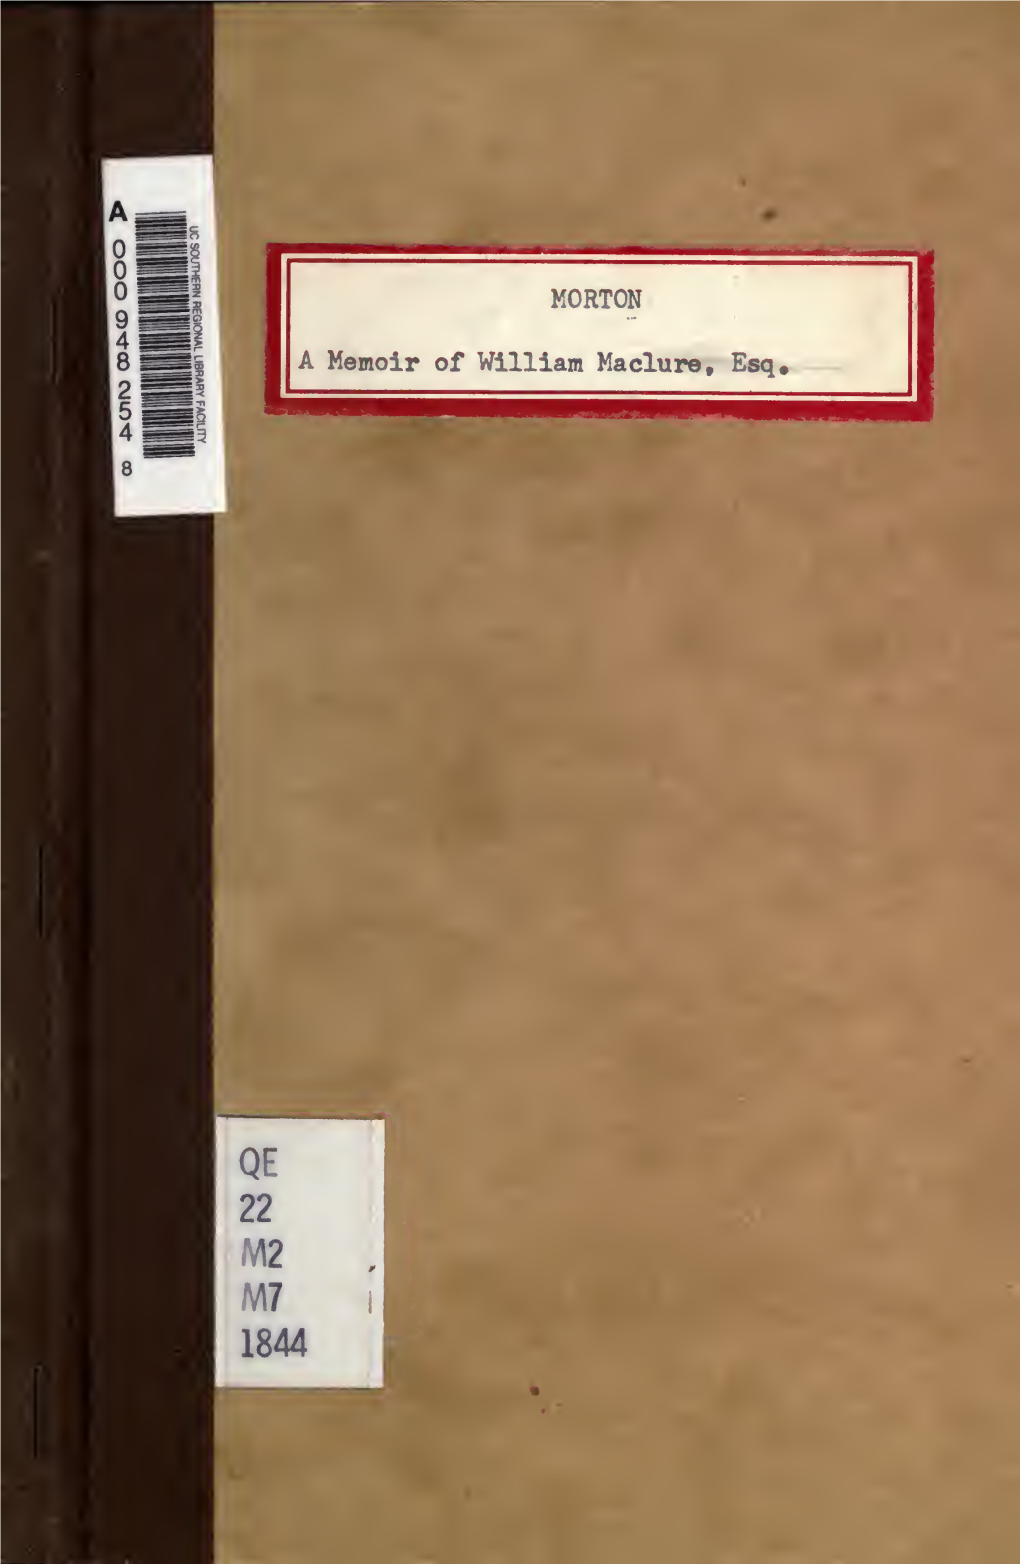 A Memoir of William Maclure, Esq., Late President of the Academy of Natural Sciences of Philadelphia